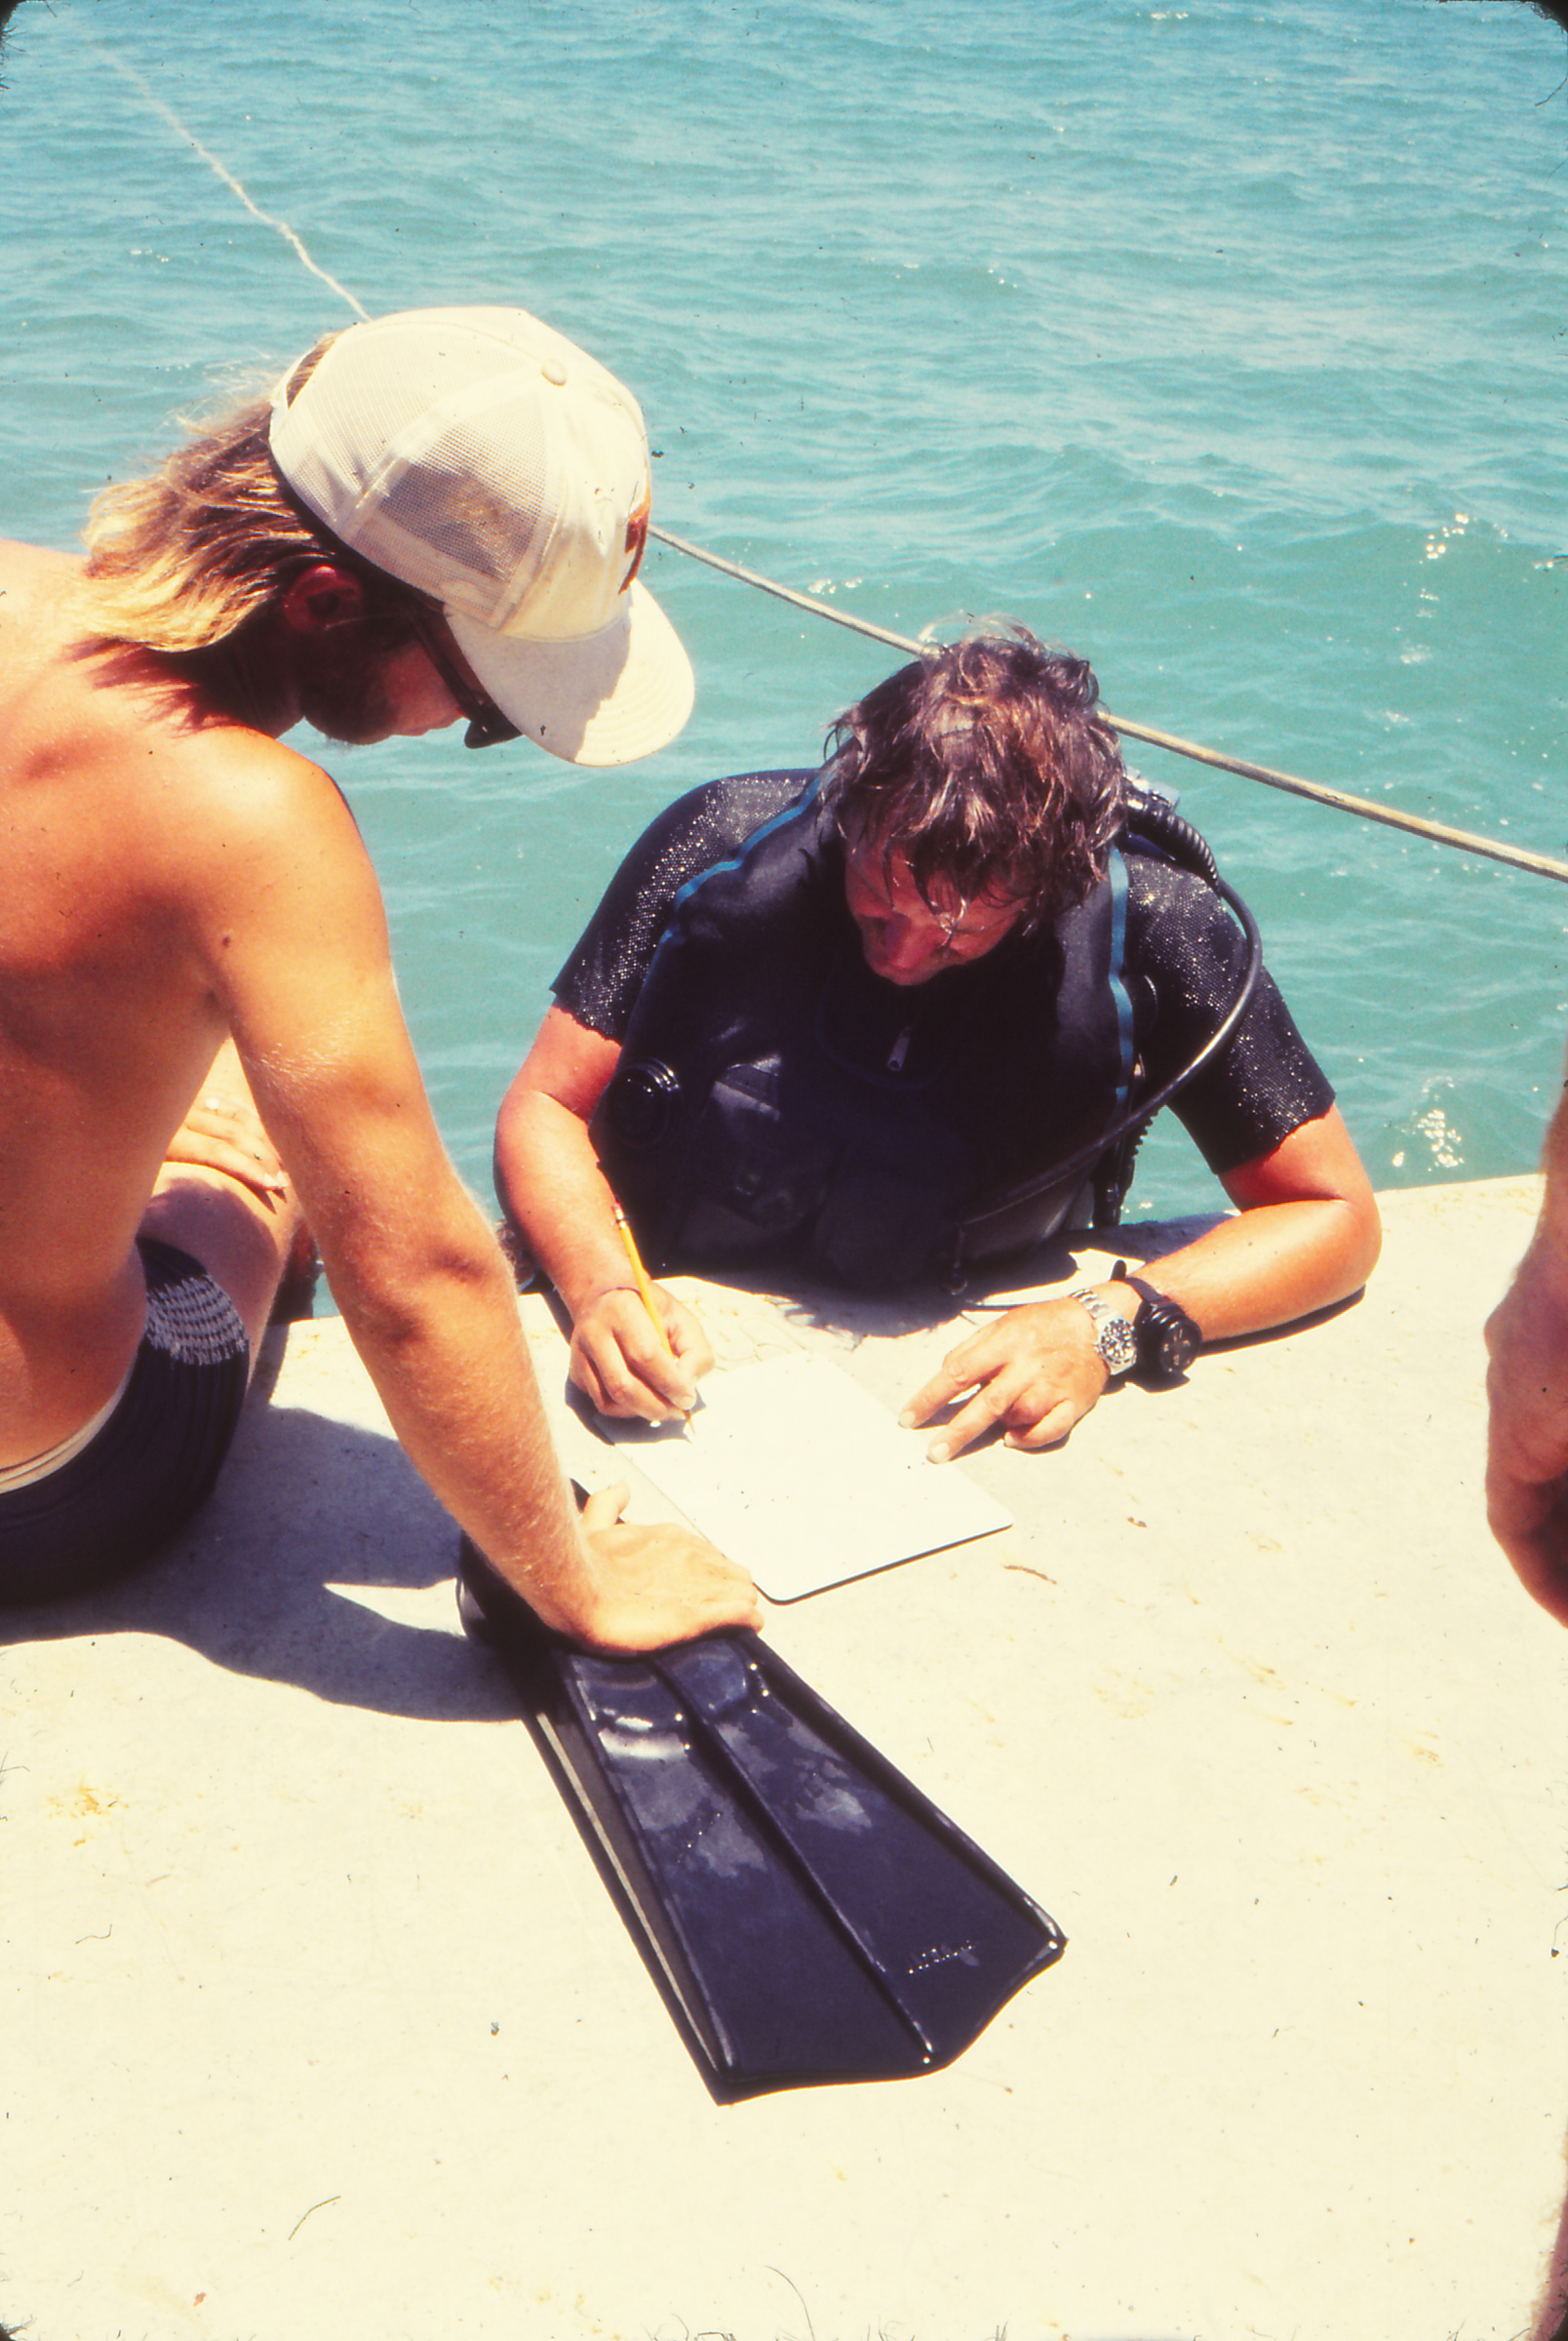 In a 1970s photo, two men in snorkeling gear chat near the water